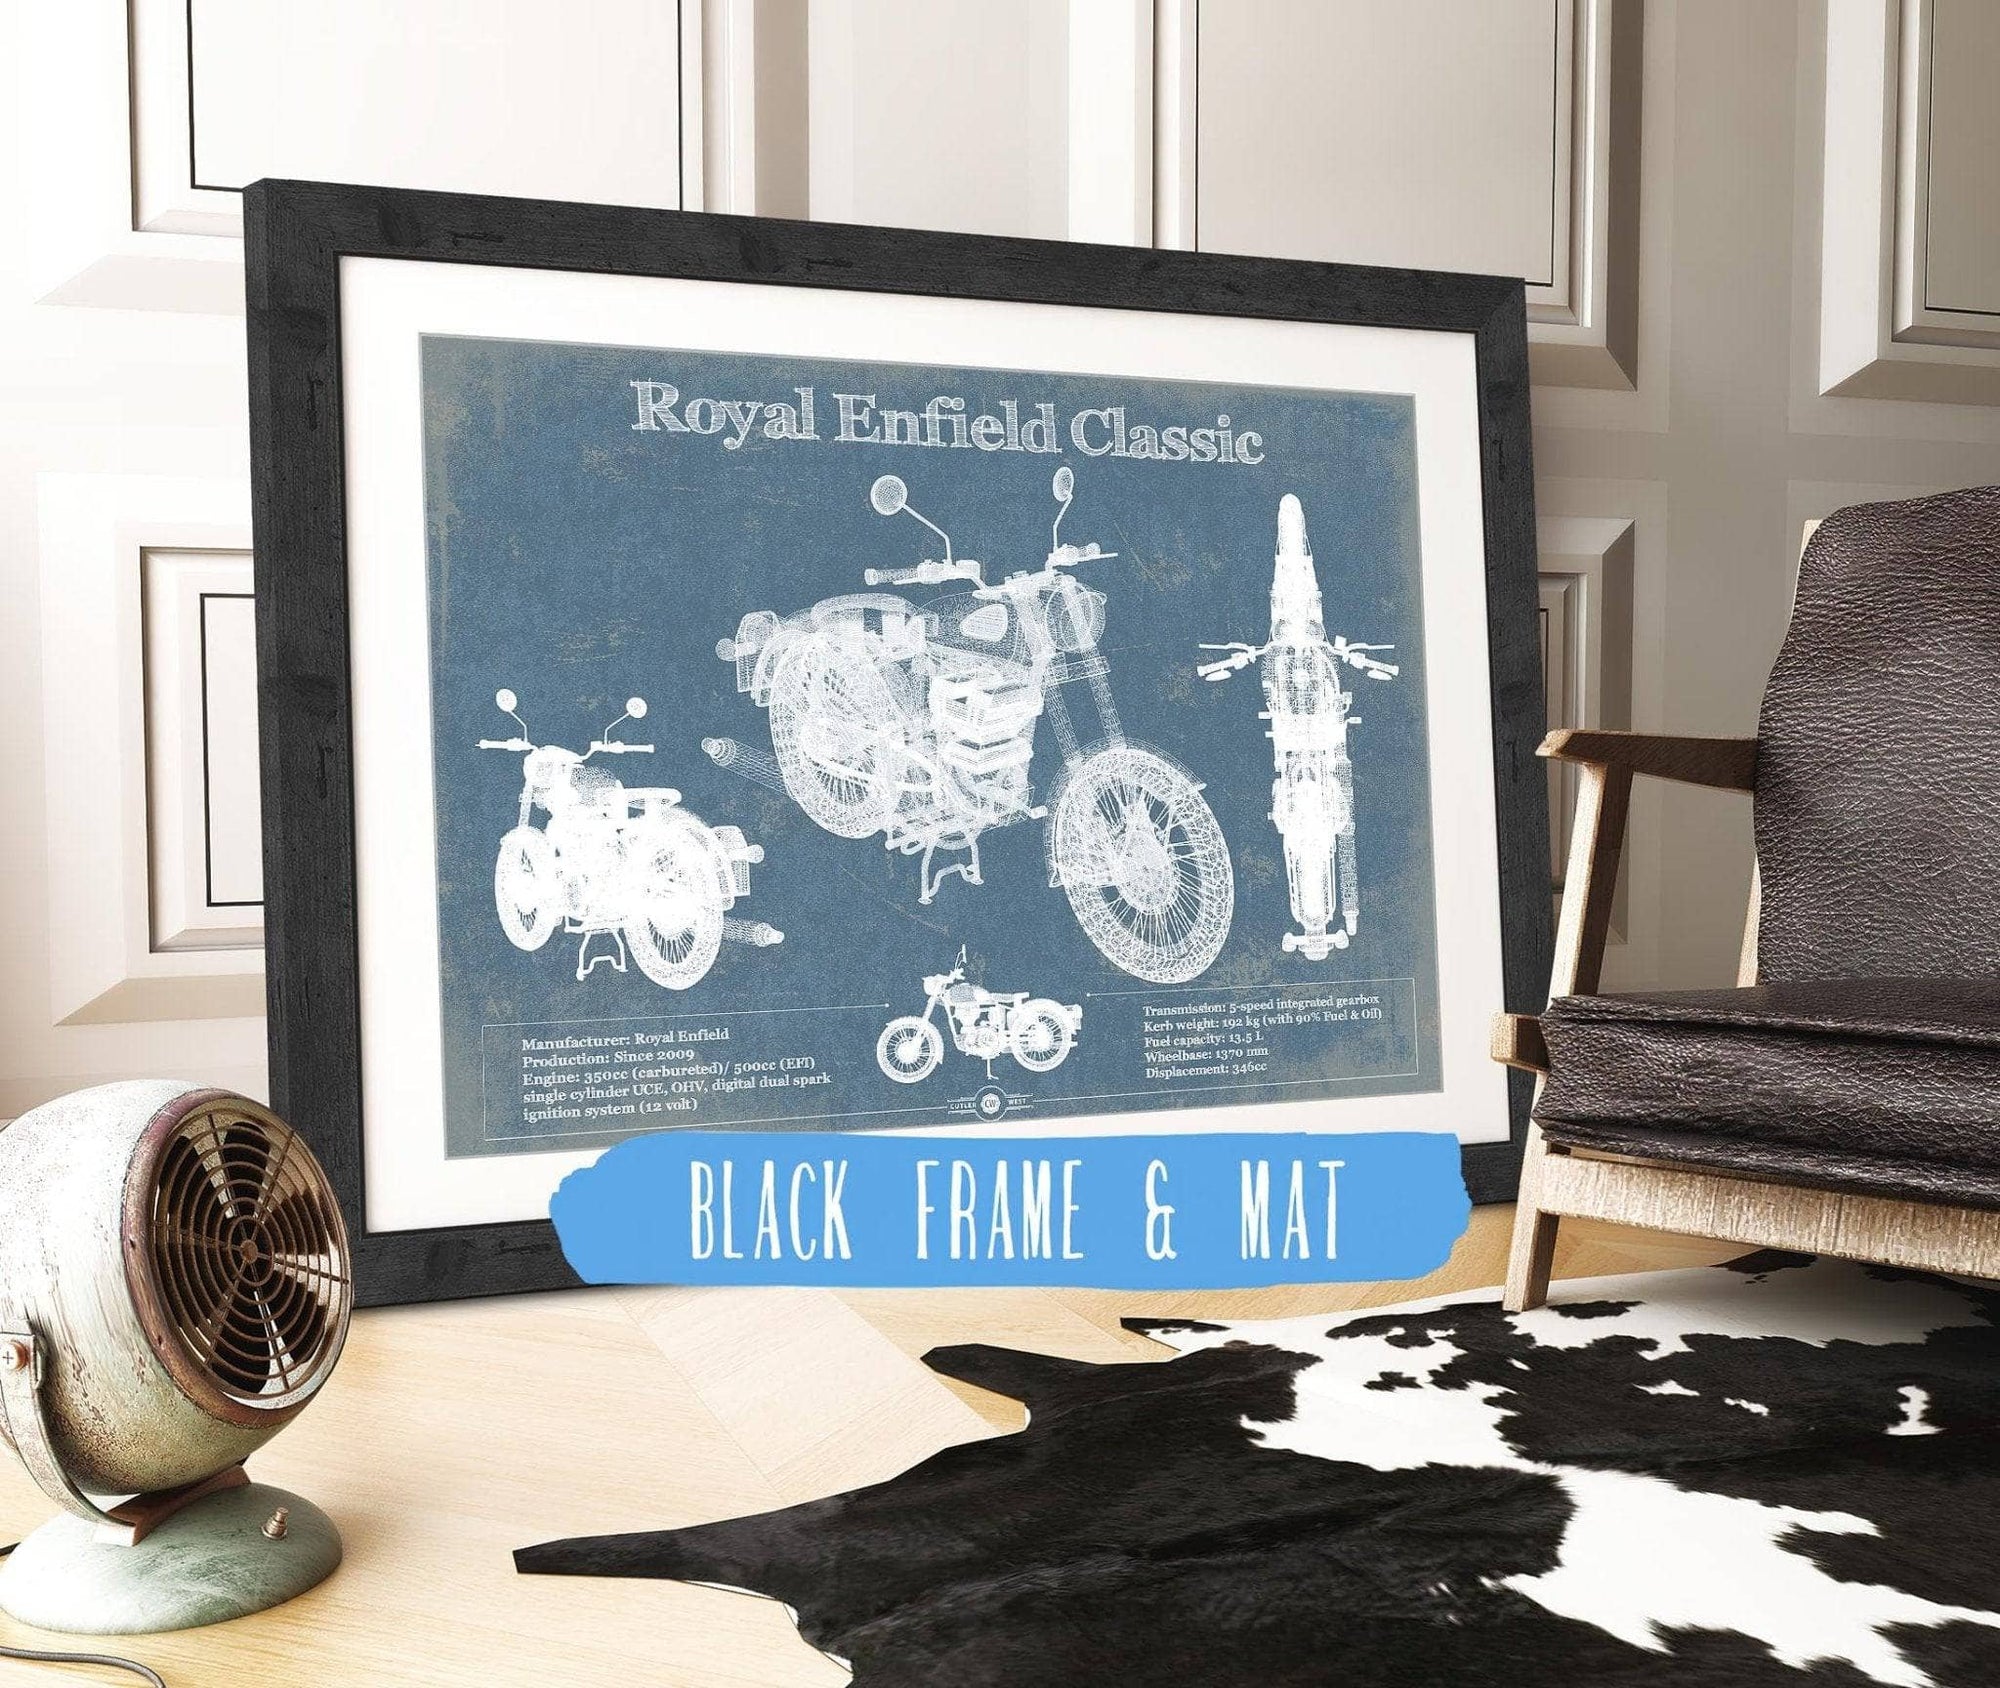 Cutler West 14" x 11" / Black Frame & Mat Royal Enfield Classis 350 And 500 Blueprint Motorcycle Patent Print 933350105_17674